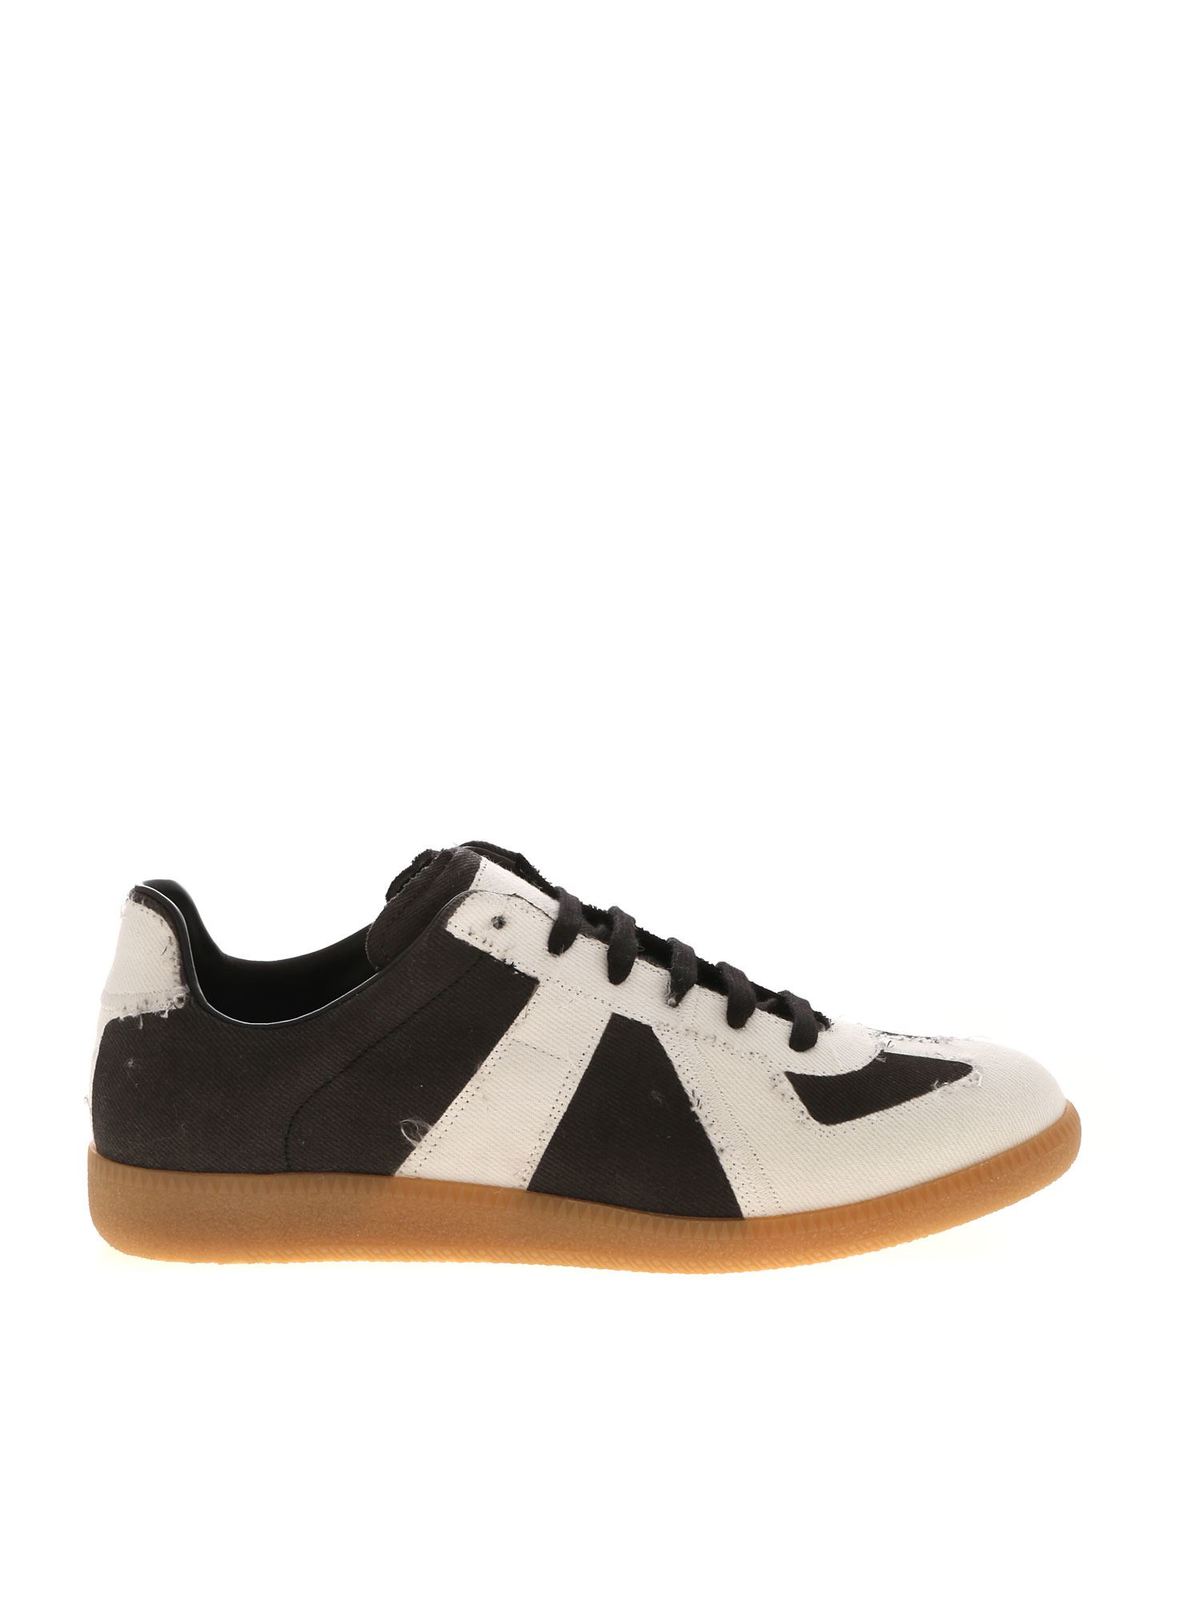 Trainers Maison Margiela - Denim effect sneakers in black and white ...